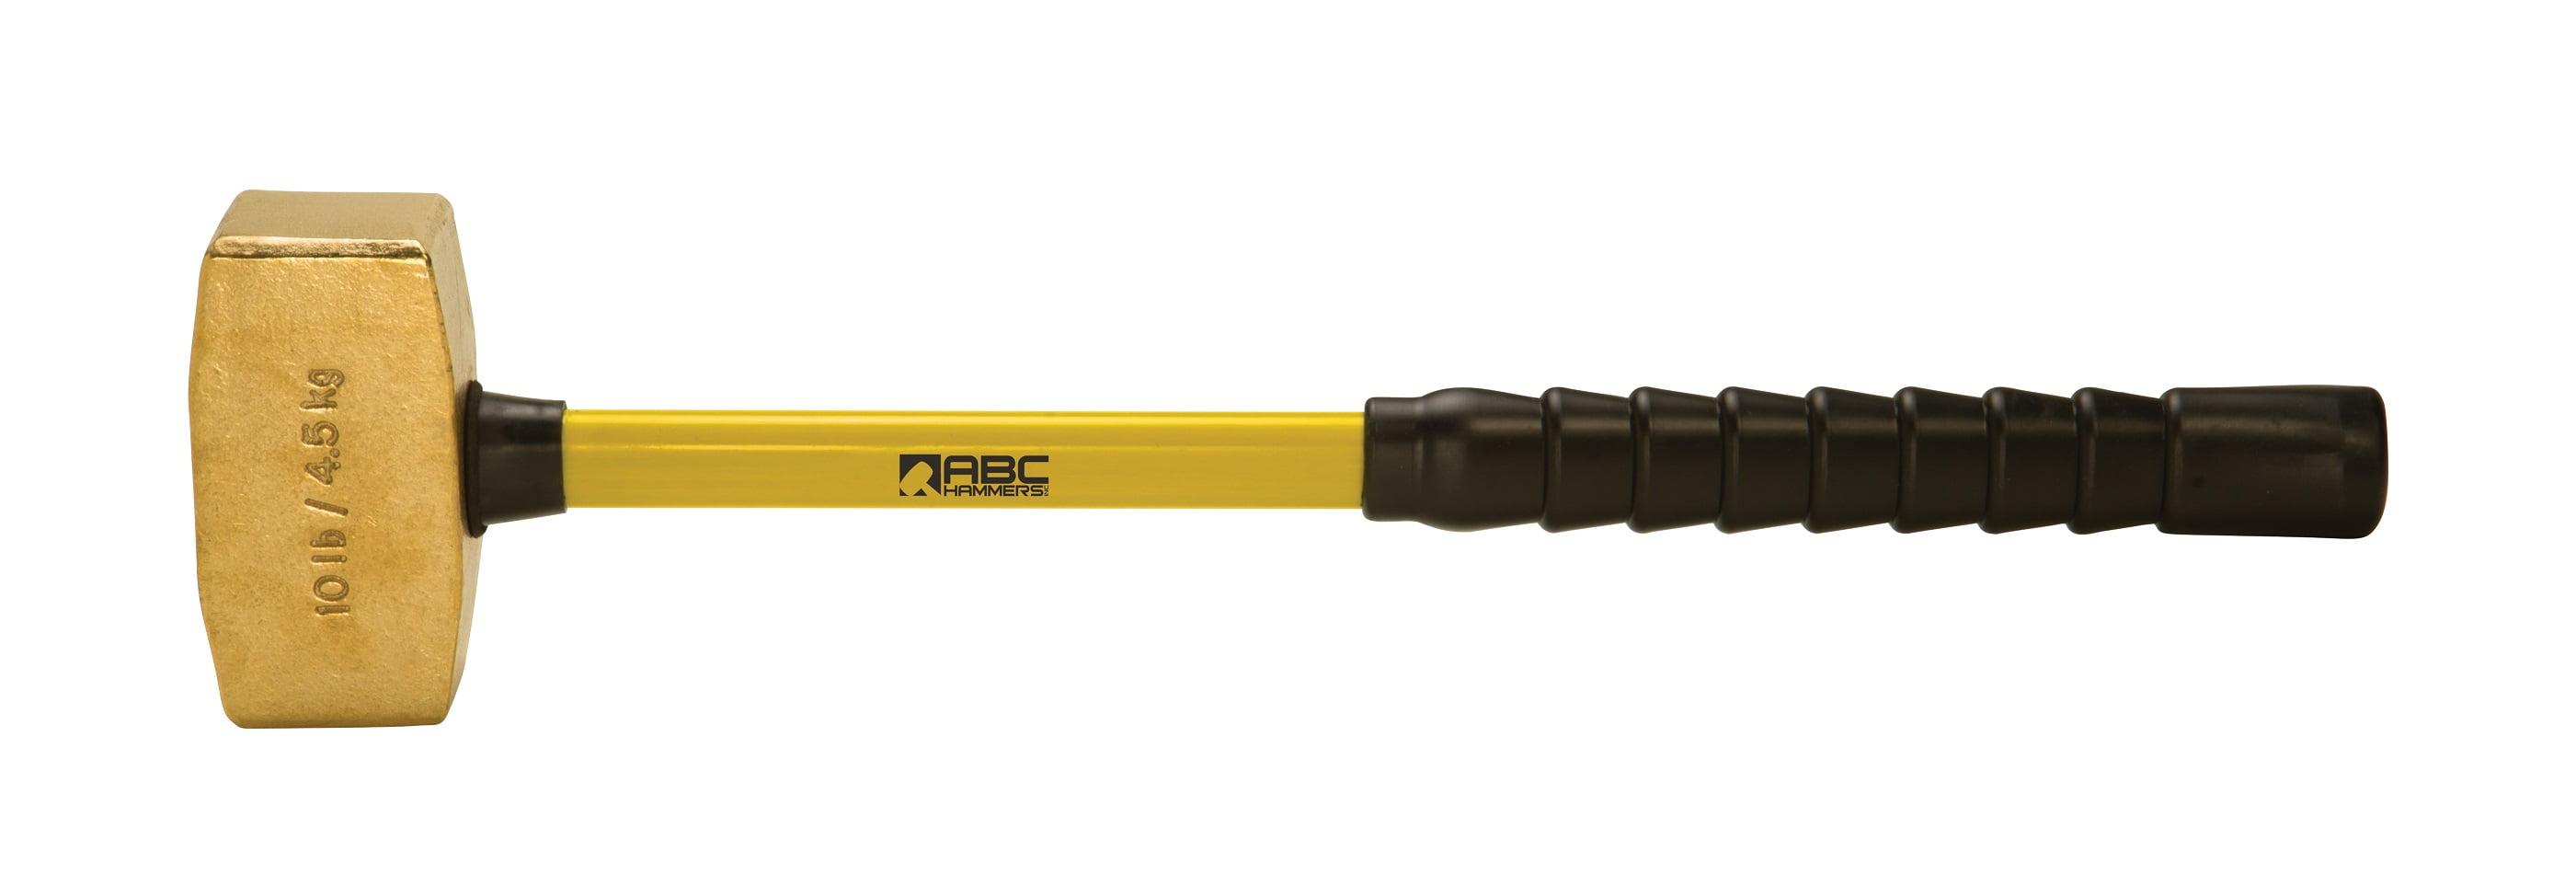 Picture of ABC Hammers ABC10BFBS 24 in. 10 lbs Brass Hammer with Fiberglass Handle